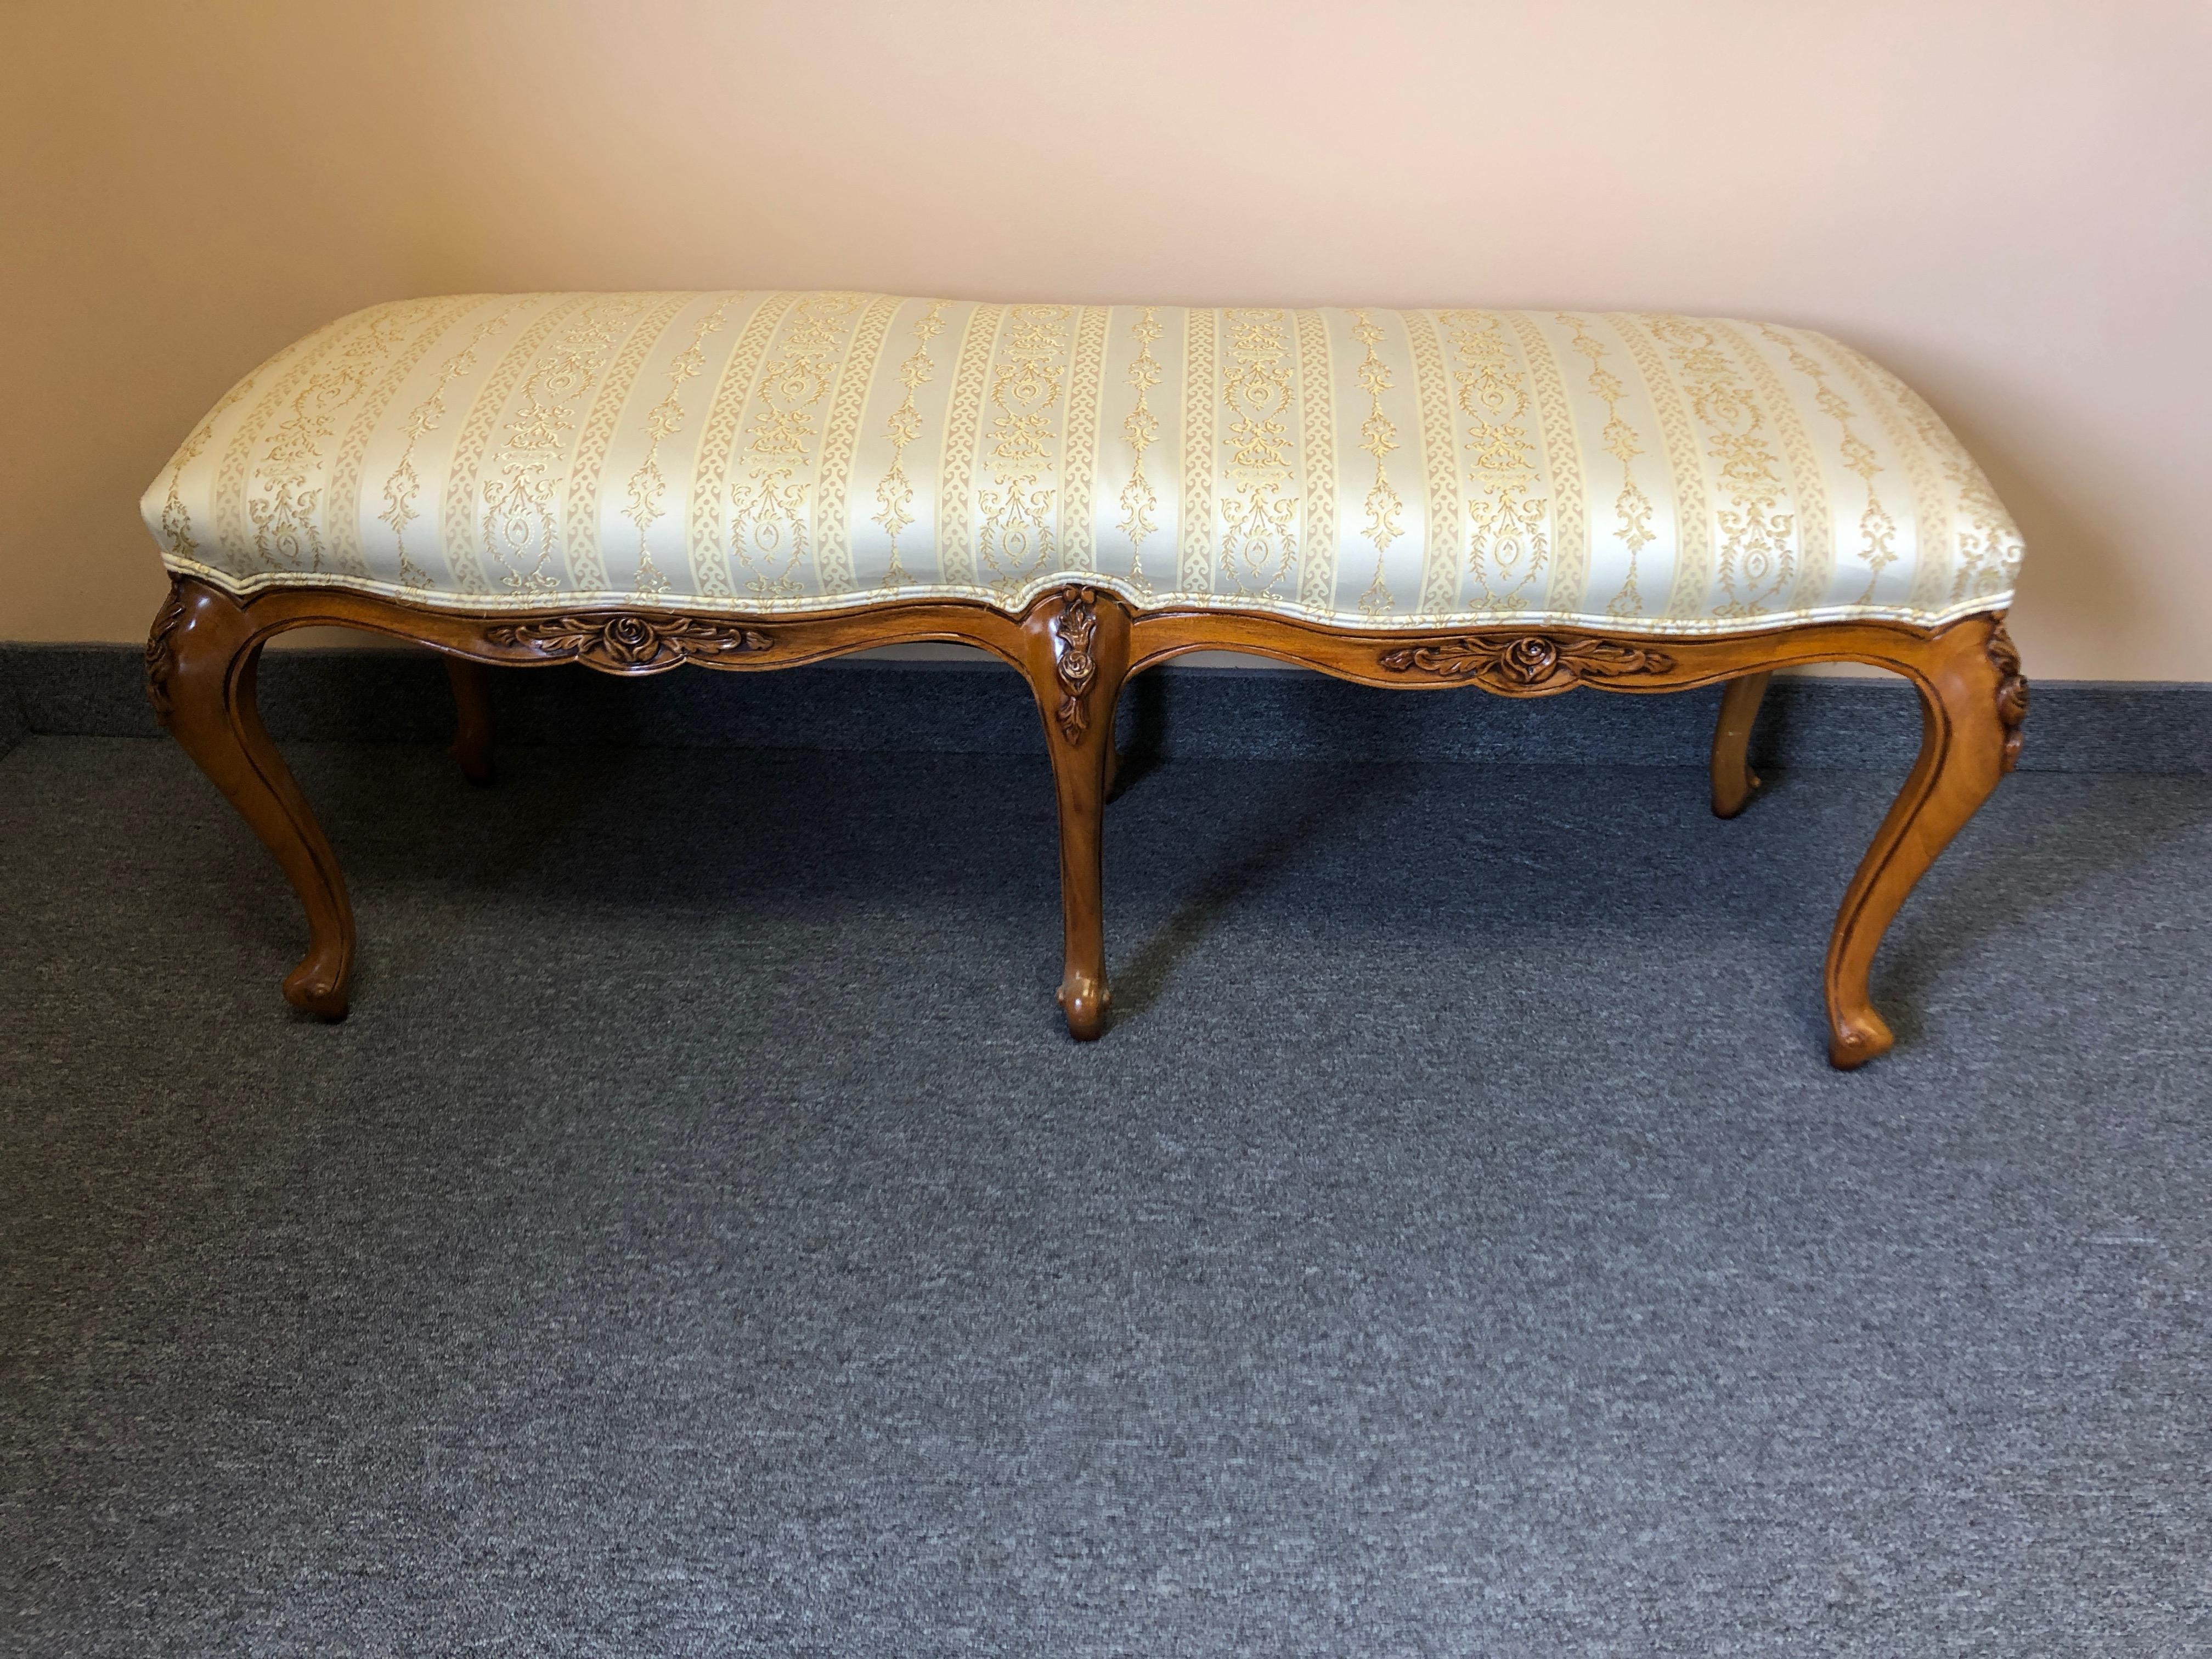 Lovely carved fruitwood bench with cream and gold silk blend upholstery. Would be great at the end of a bed, and there's a headboard to match.